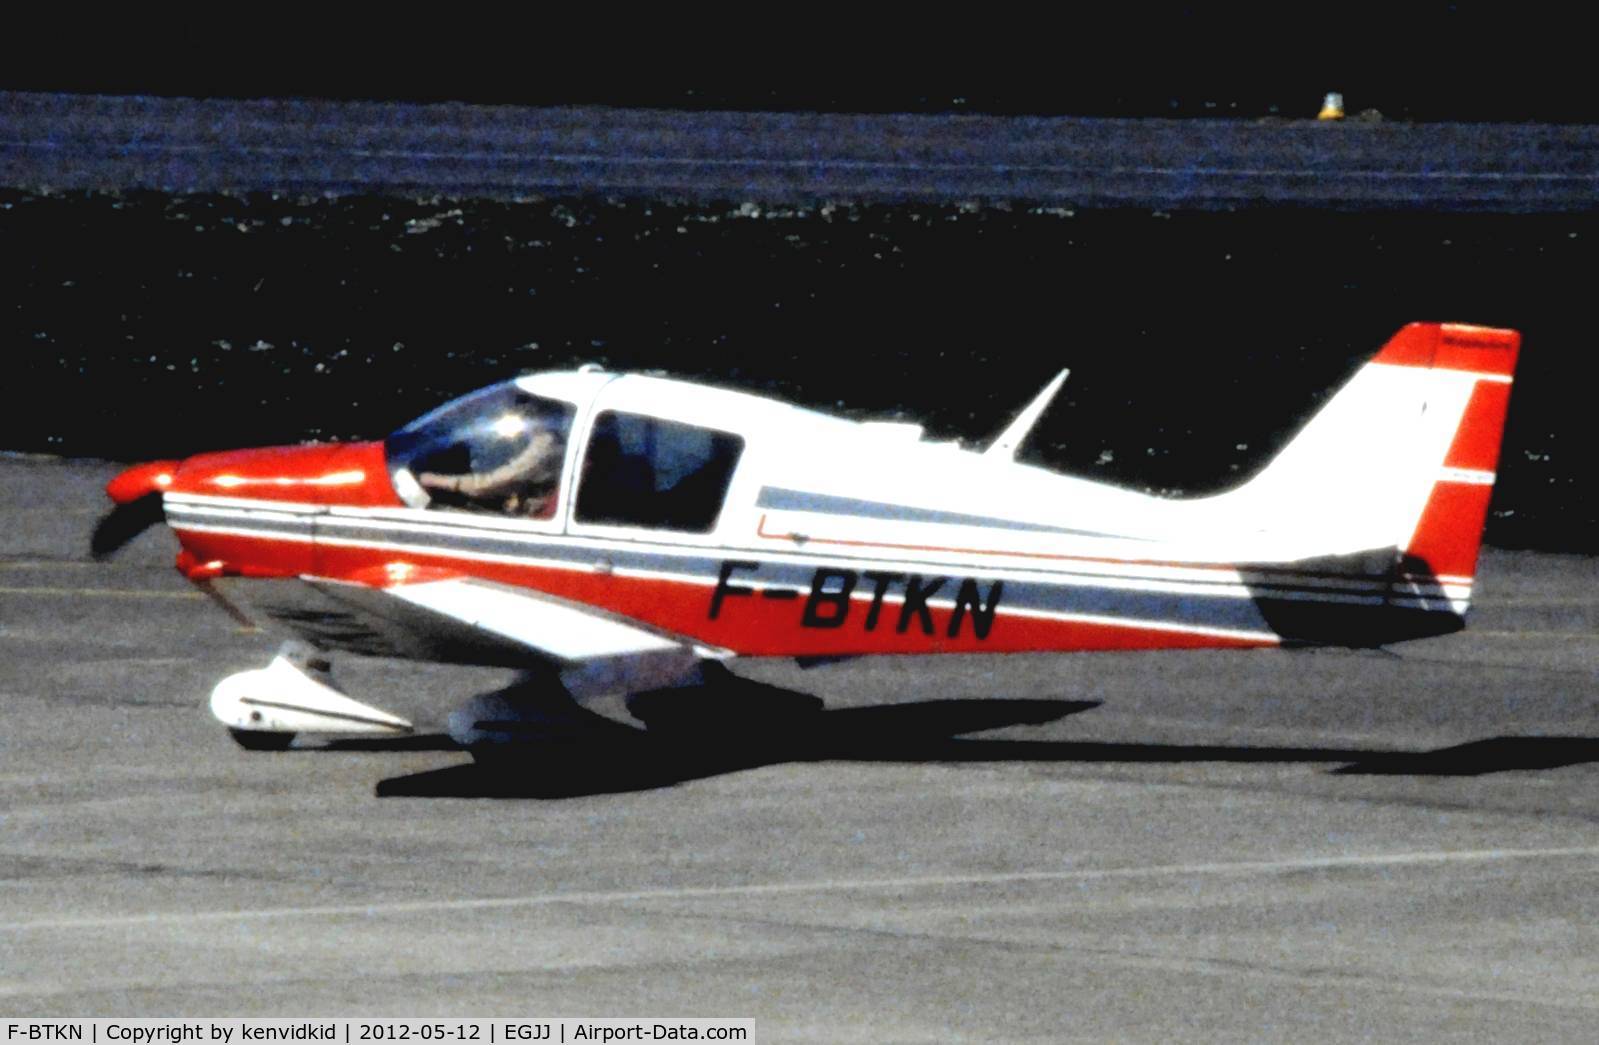 F-BTKN, Robin DR-400-160 Chevalier C/N 715, At Jersey airport early 1970's.
Scanned from slide.